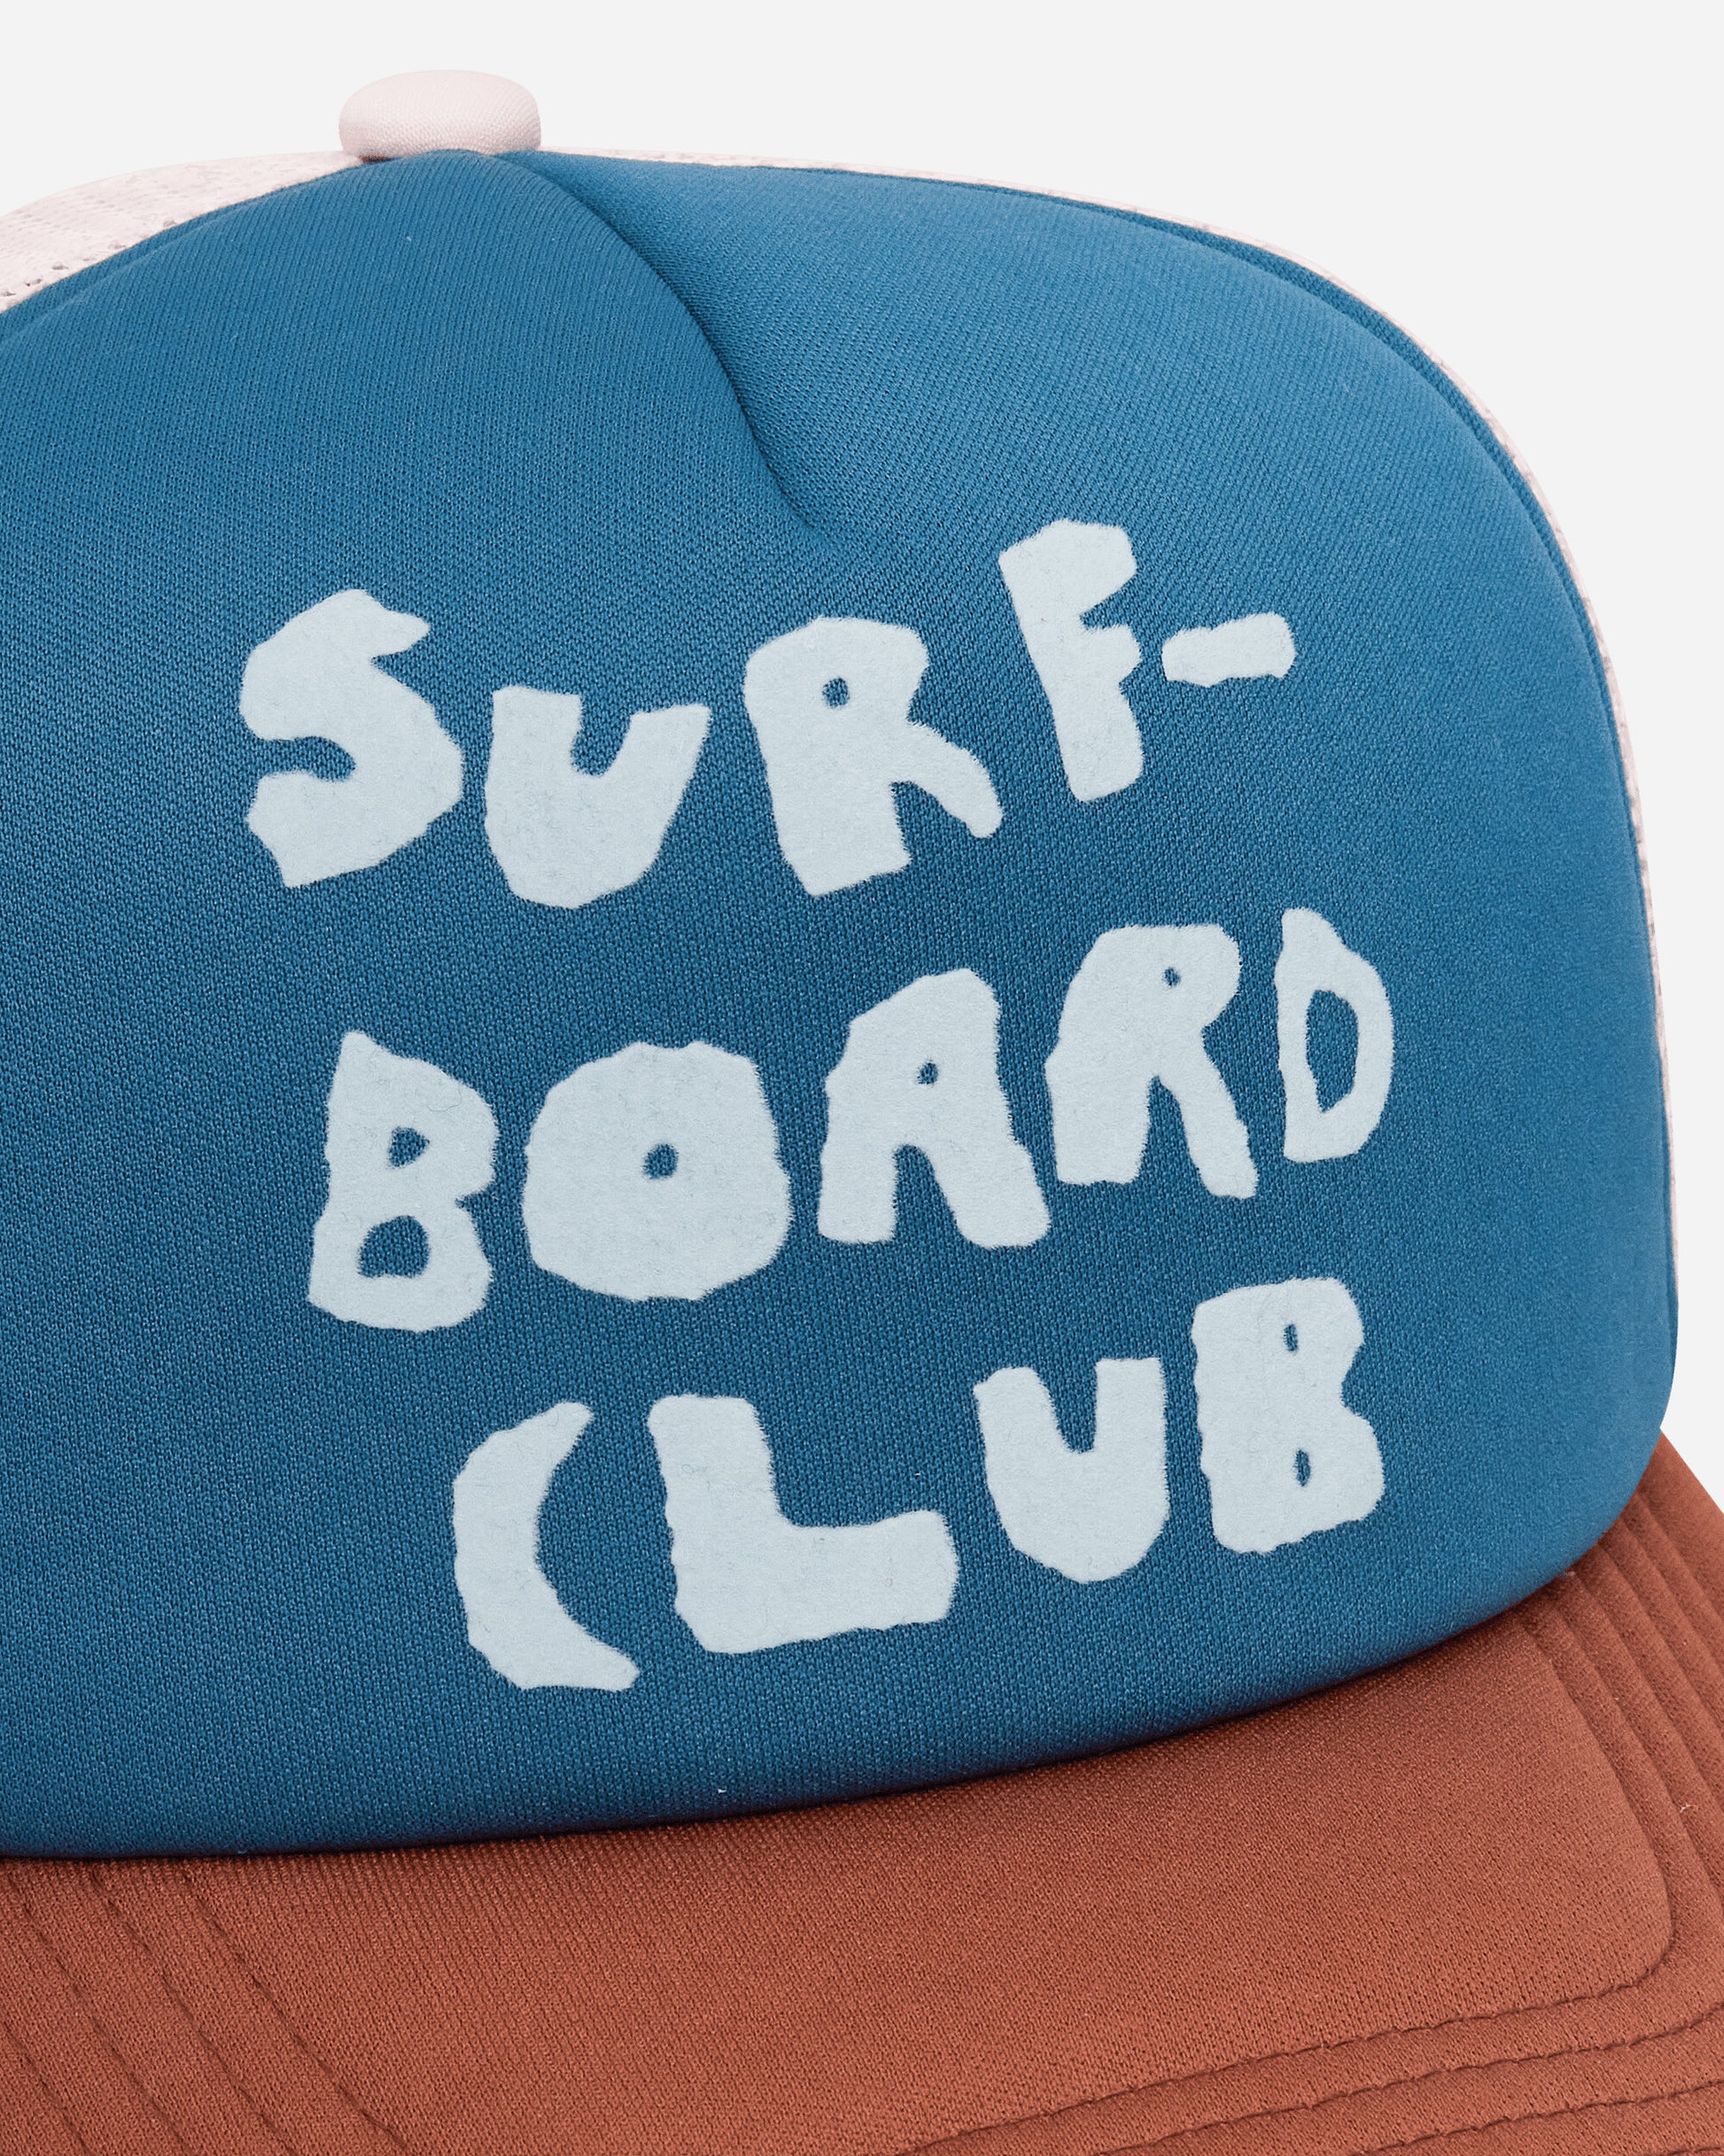 Stockholm (Surfboard) Club Pete Logo Blue and Brown Hats Caps U7000056 1